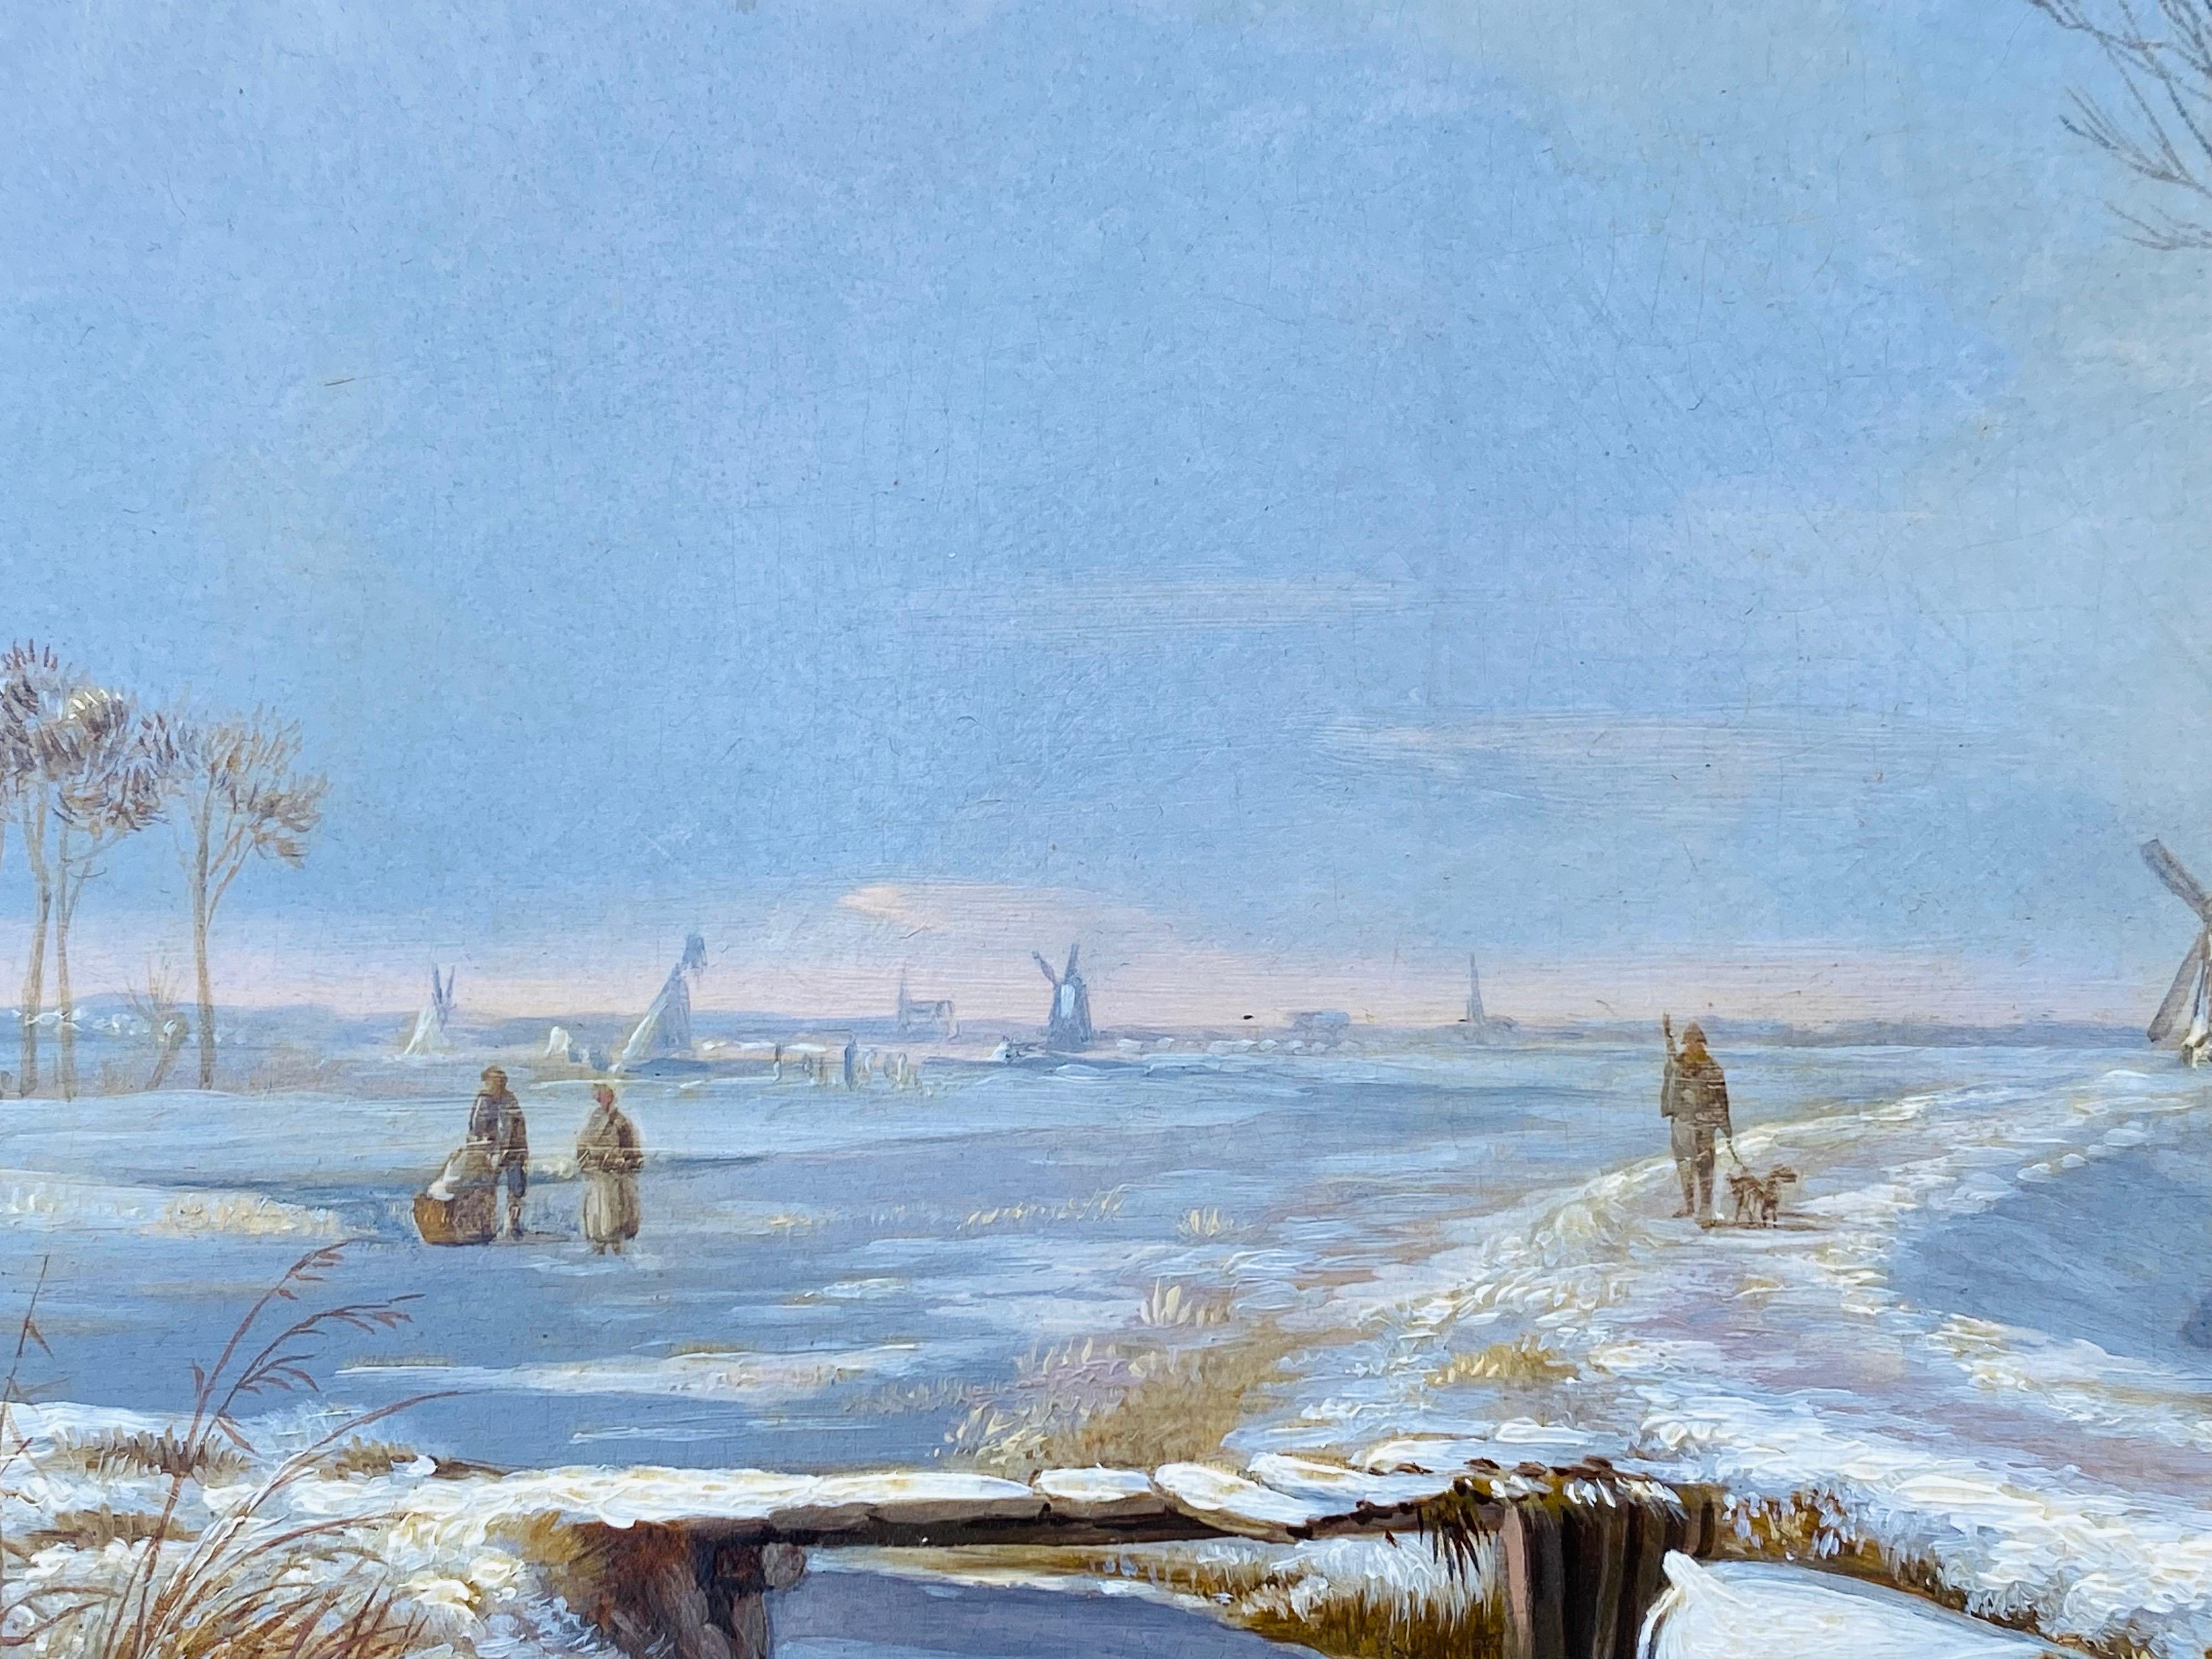 19th century Dutch oil painting of a sunny winter Landscape - Genre Figurative - Brown Figurative Painting by Johan Adolph Rust